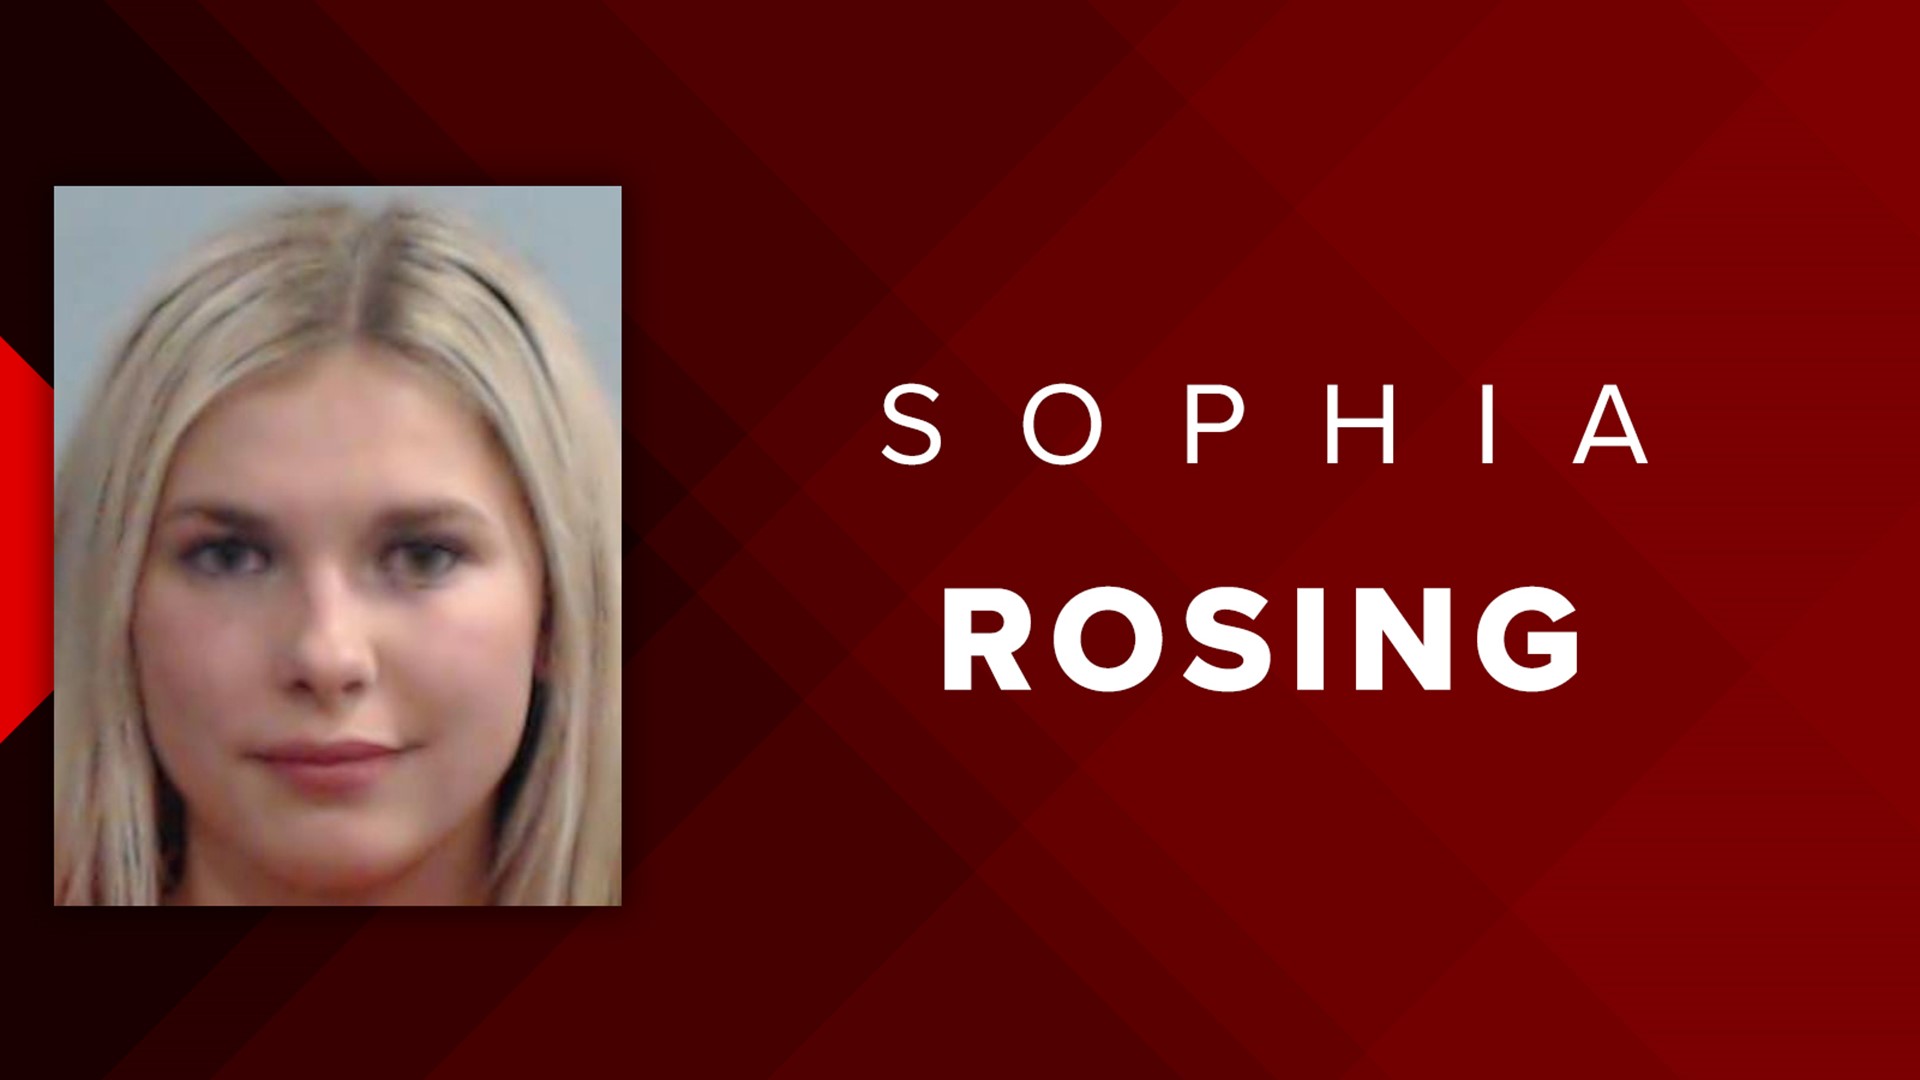 Sophia Rosing, who was a senior set to graduate from University of Kentucky in May, will seek help for the issue she has, attorney Fred Peters said.